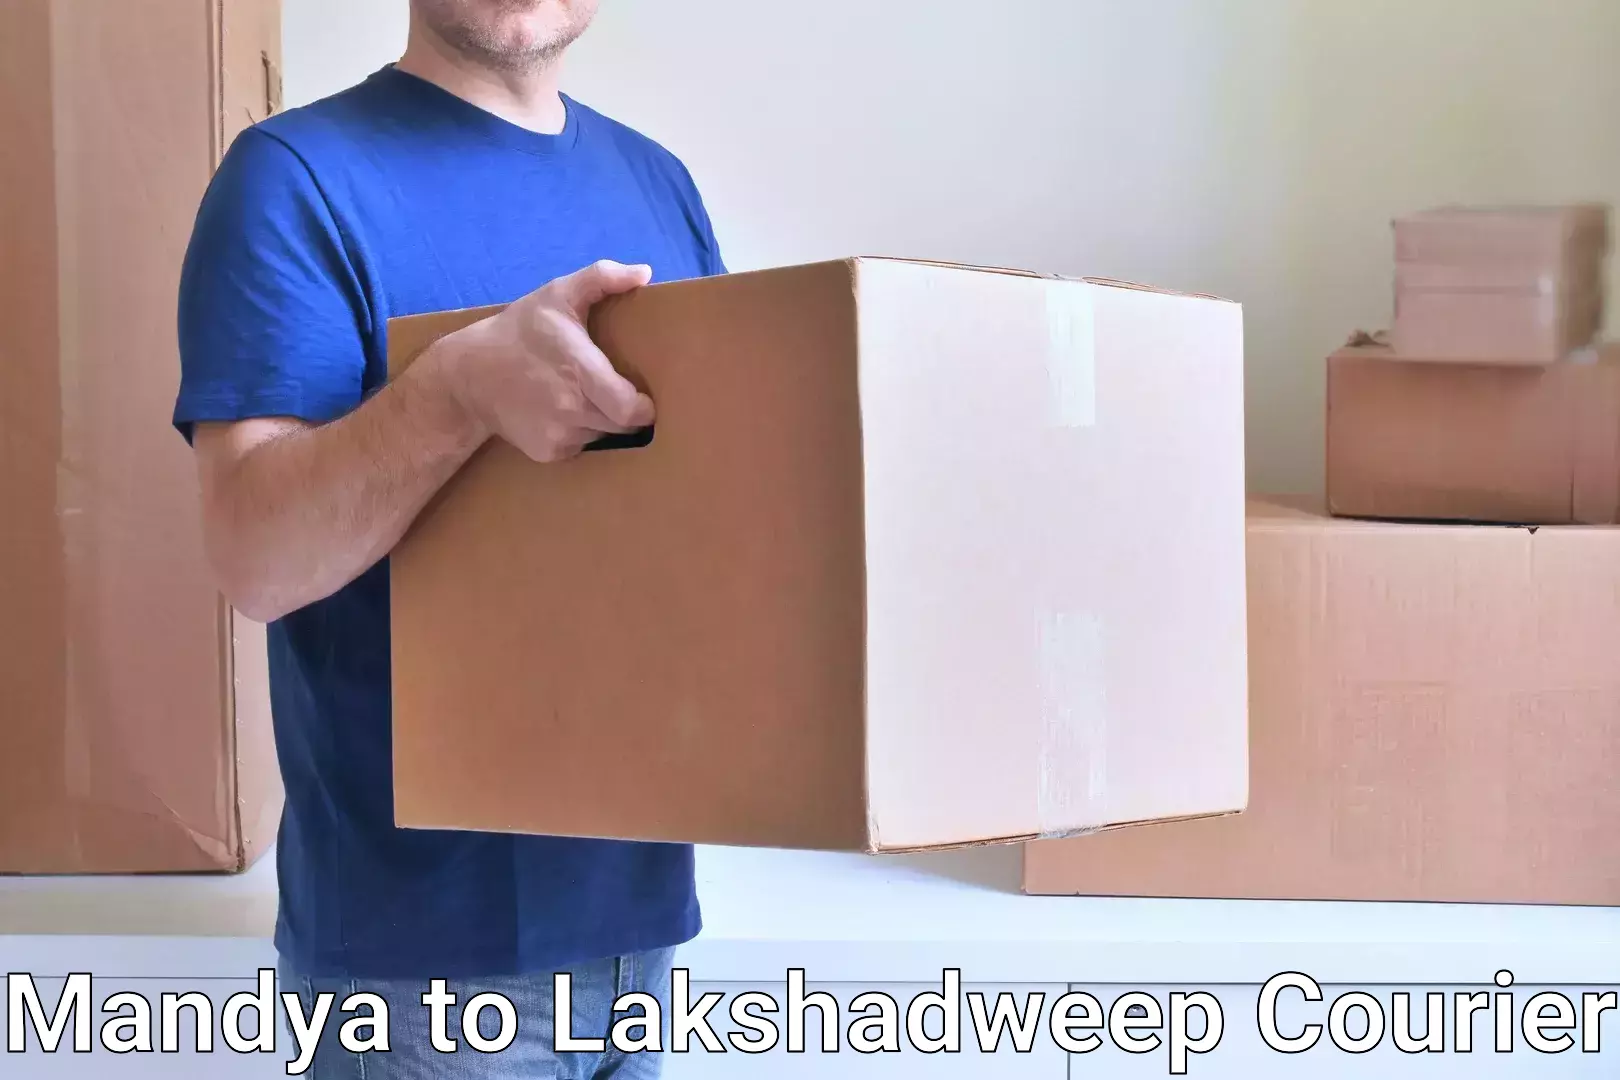 Sustainable courier practices Mandya to Lakshadweep